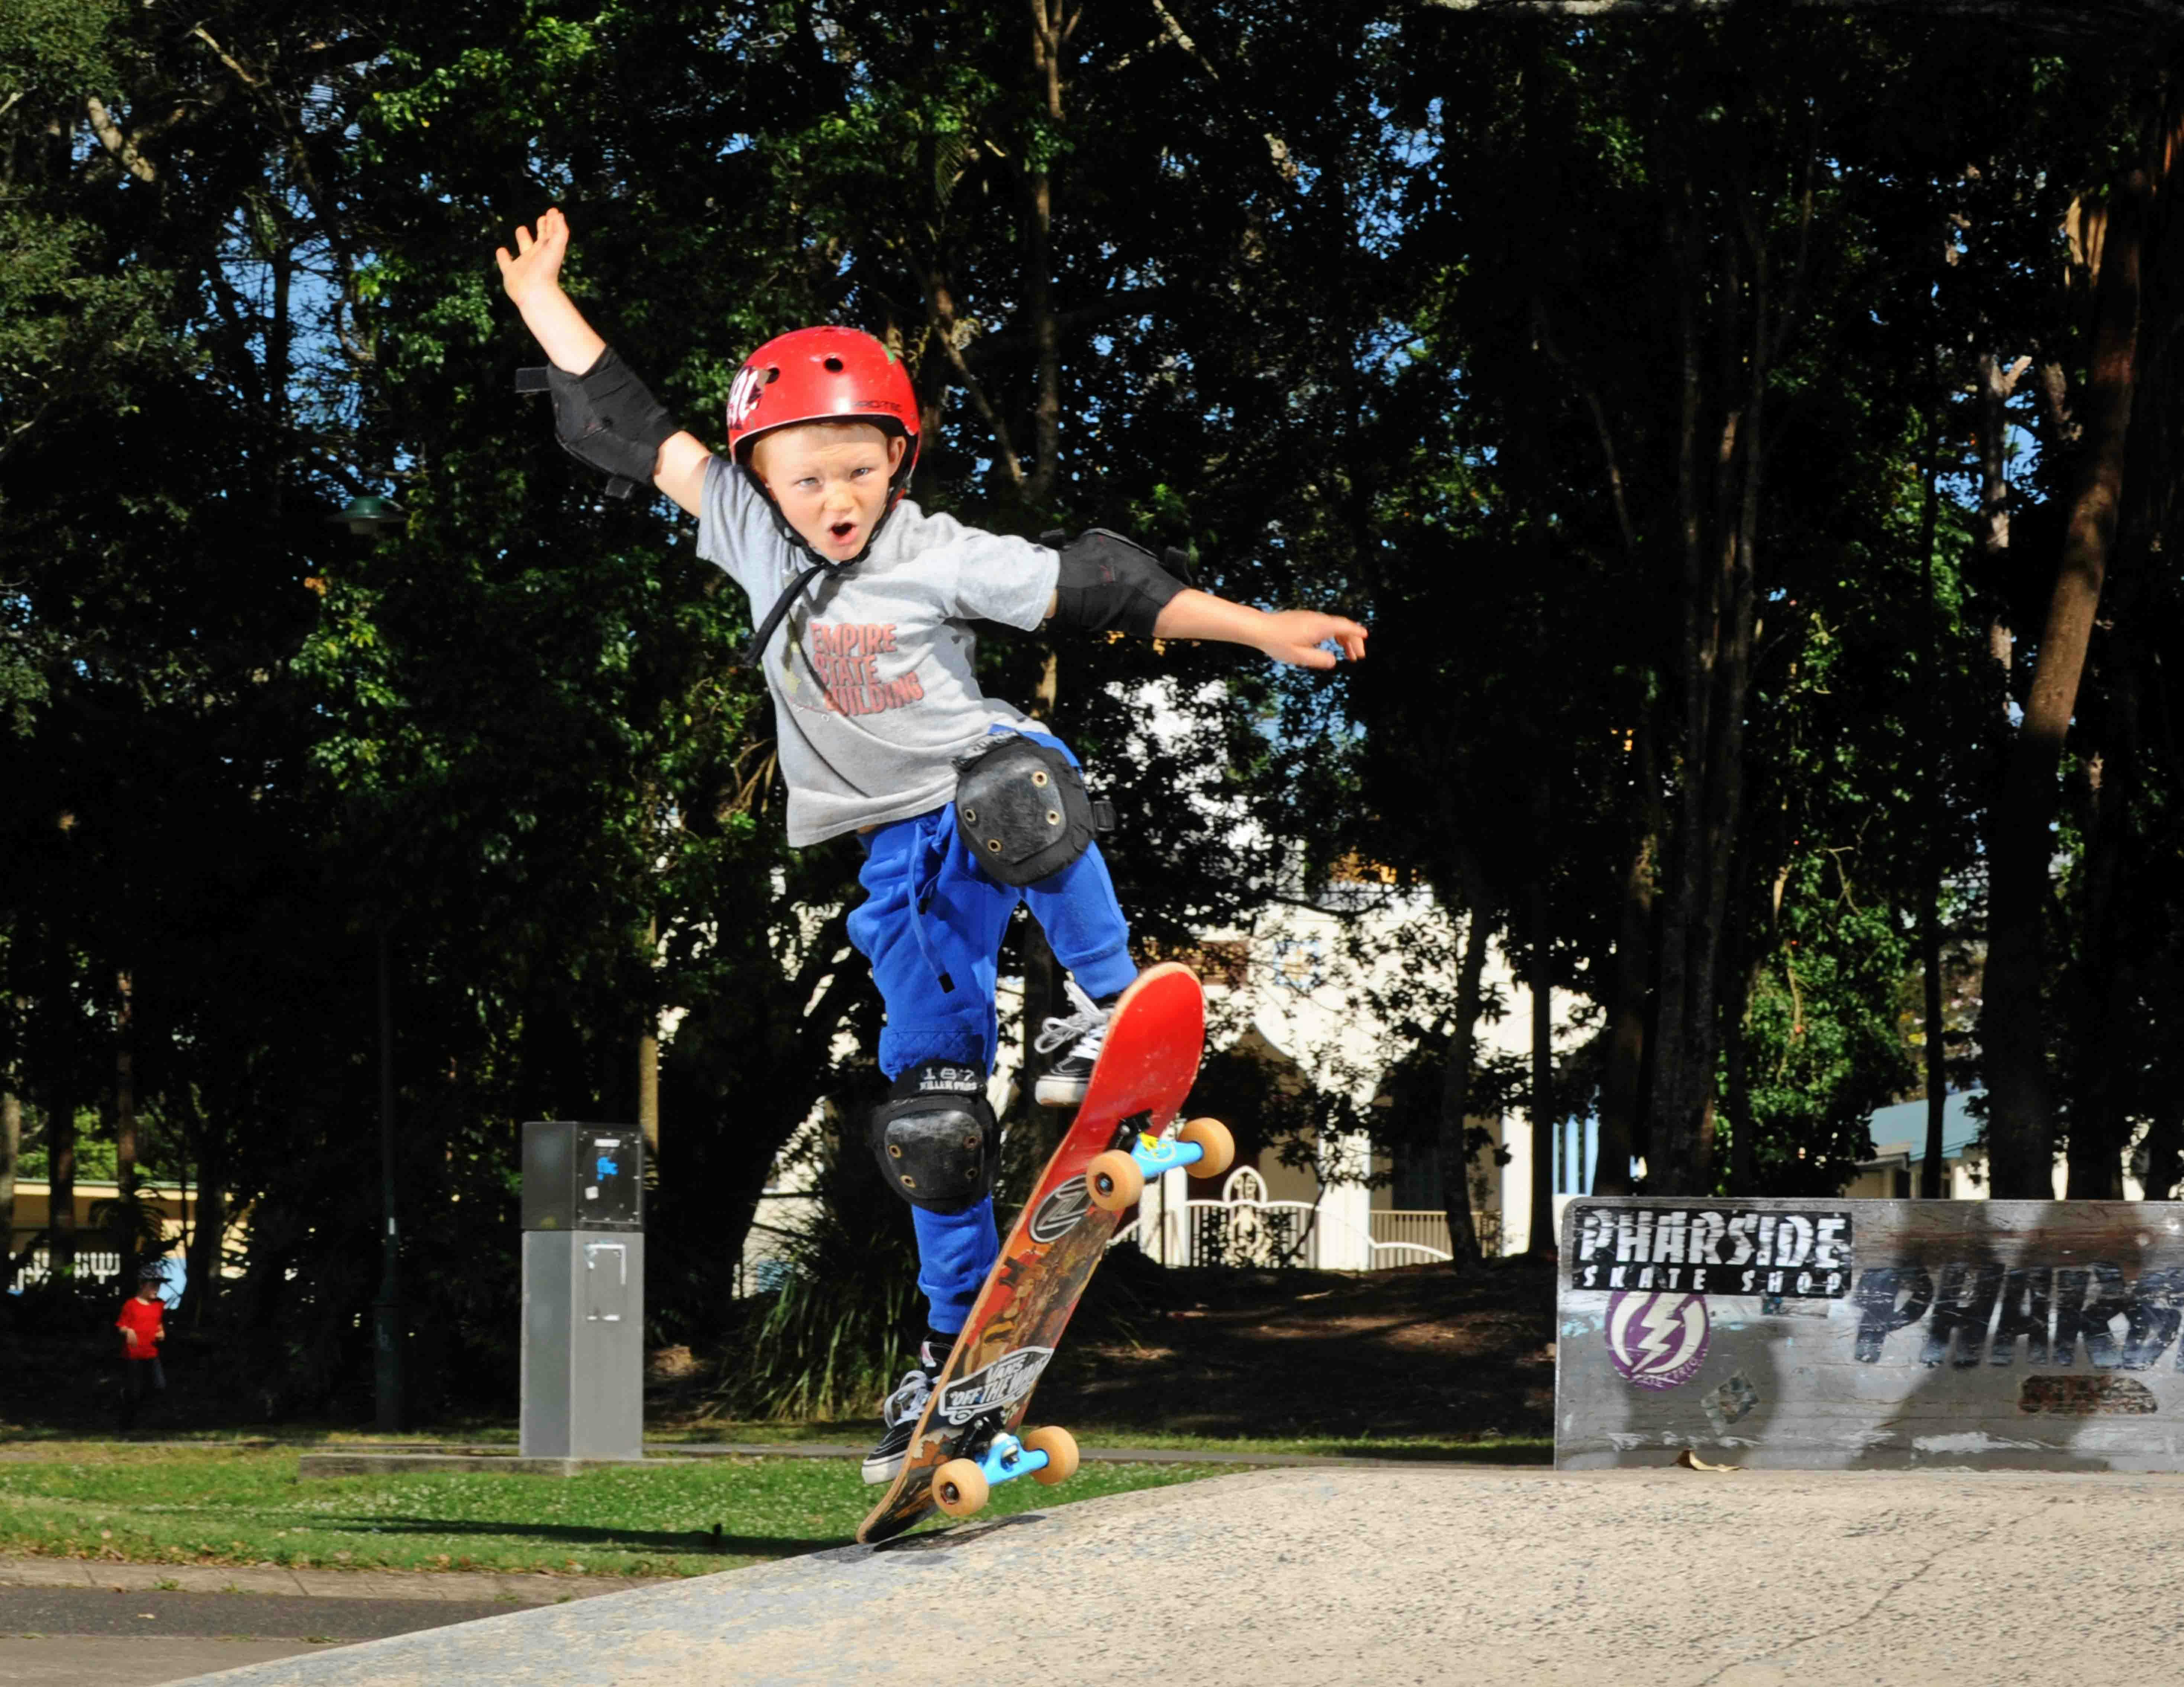 Skate parks and other facilities for young people are an essential part of open space.